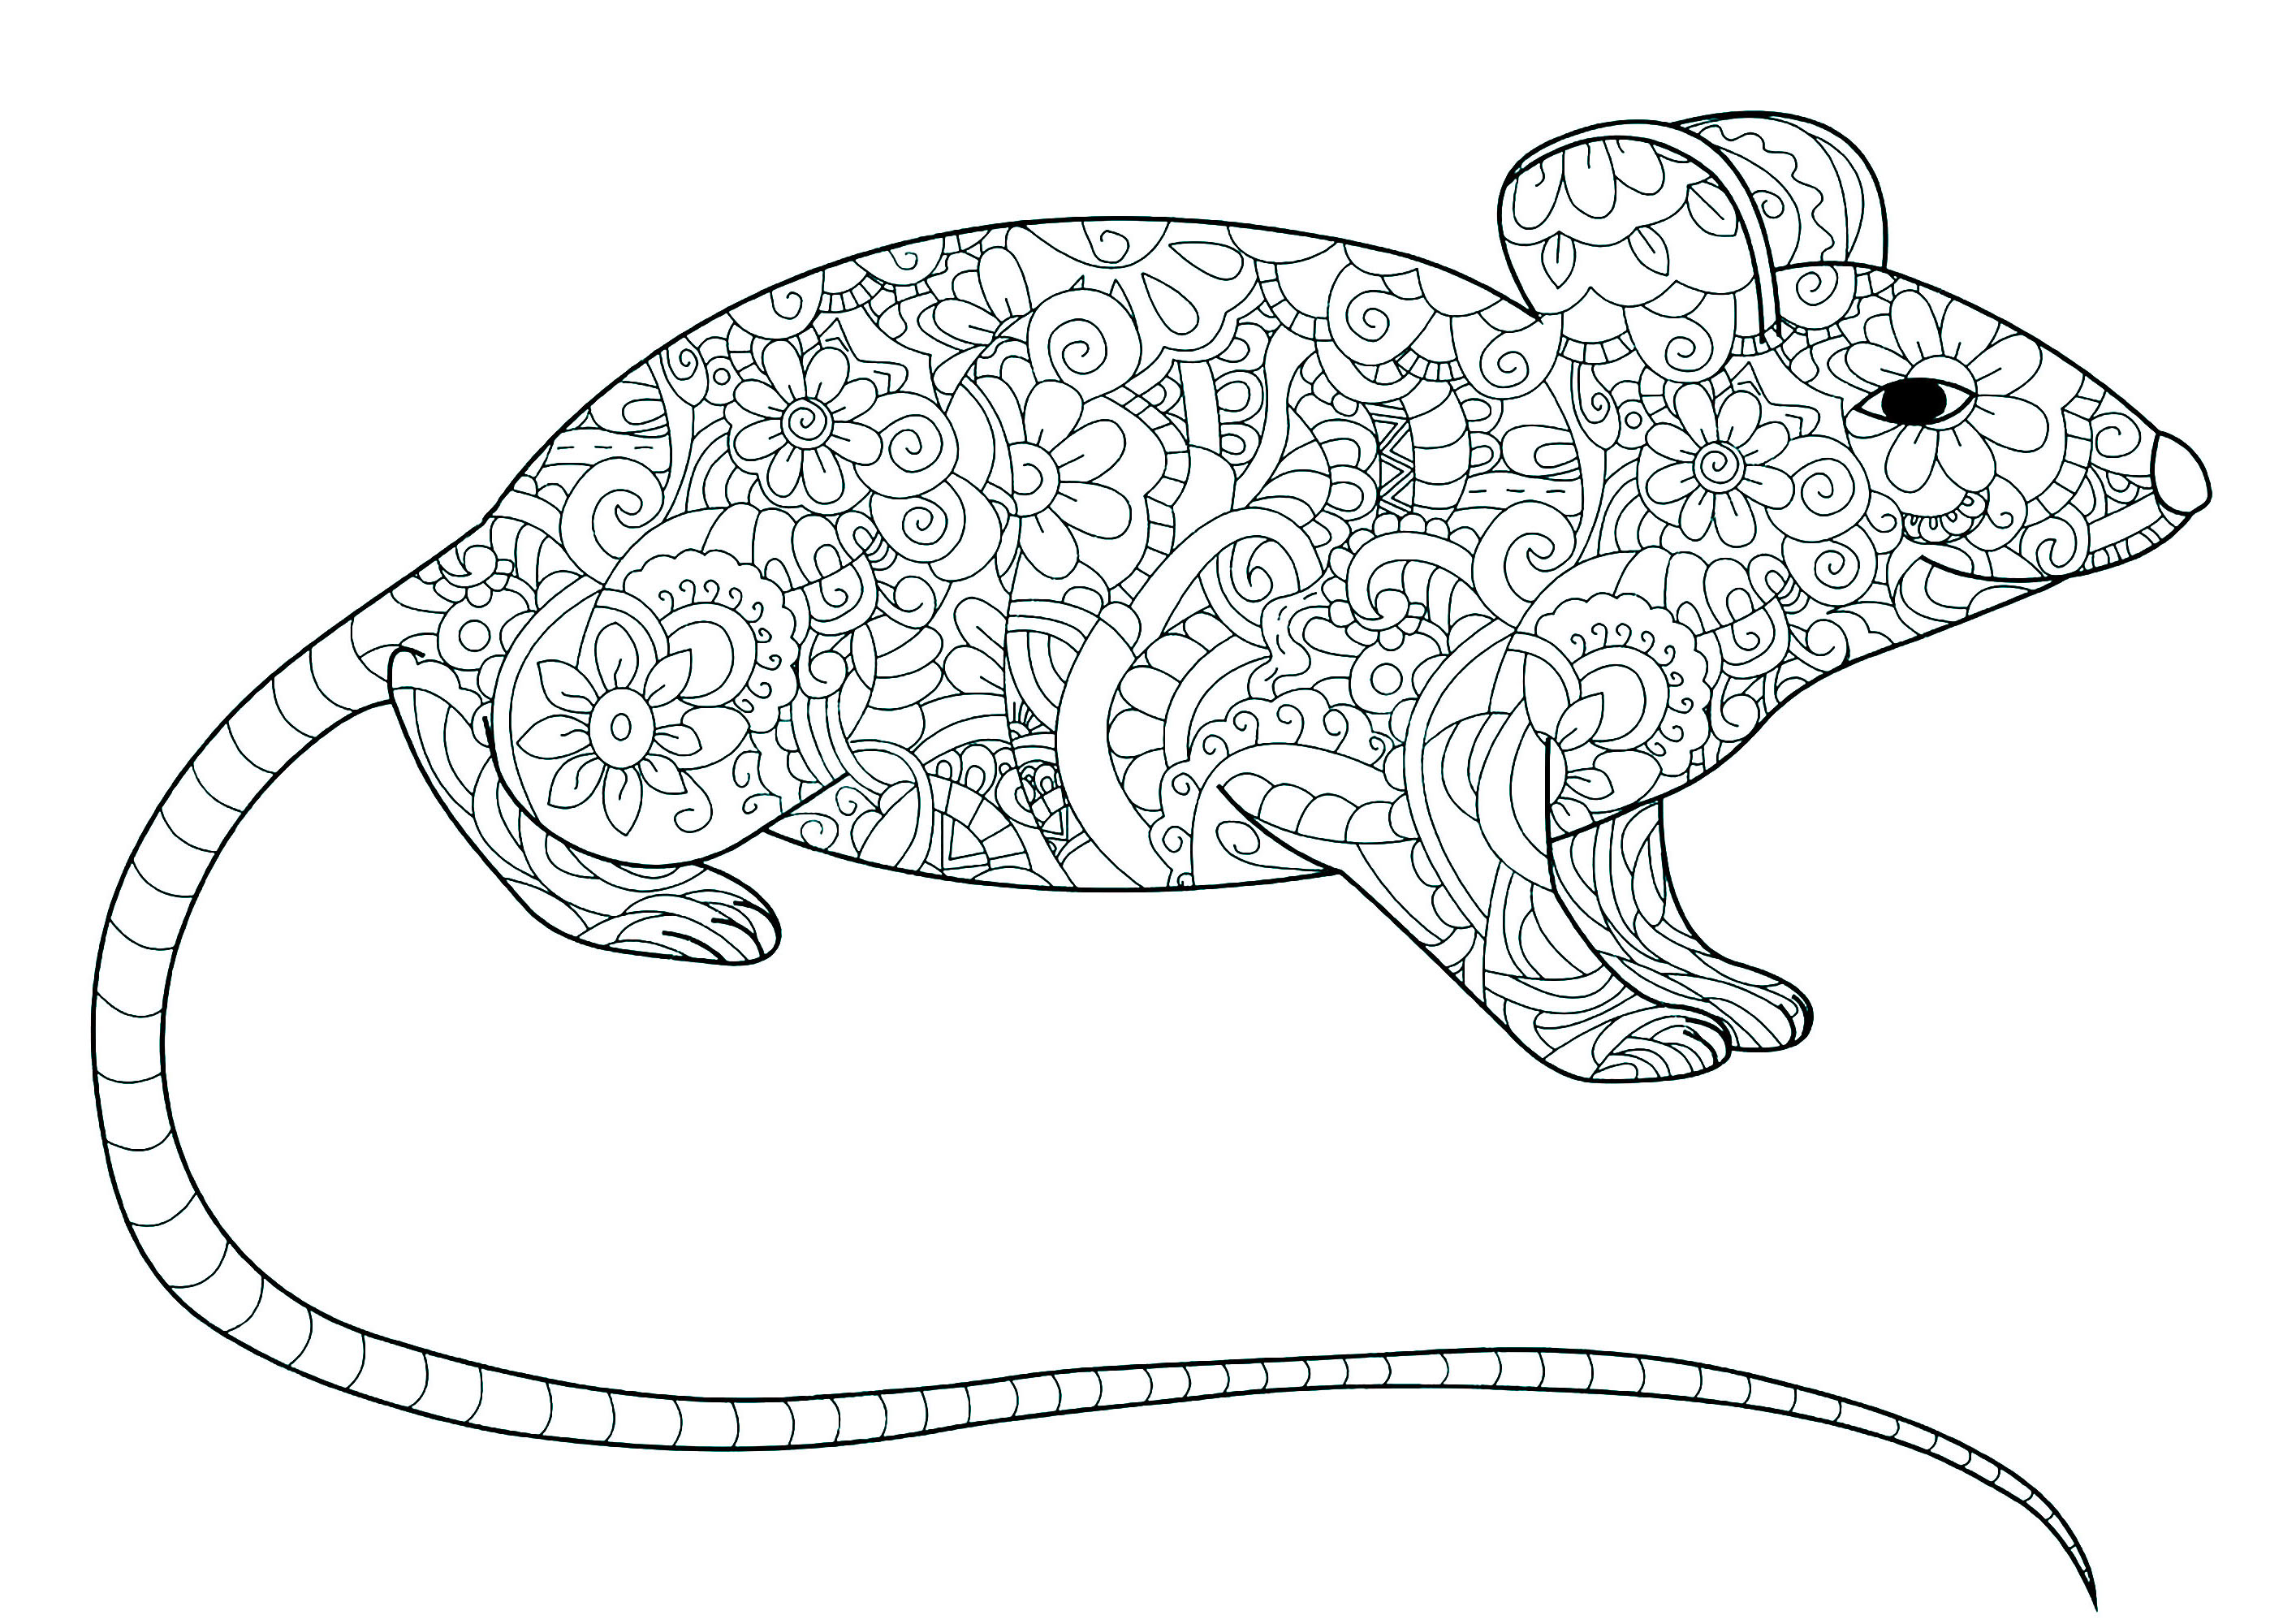 Mouse to color for kids - Mouse Kids Coloring Pages